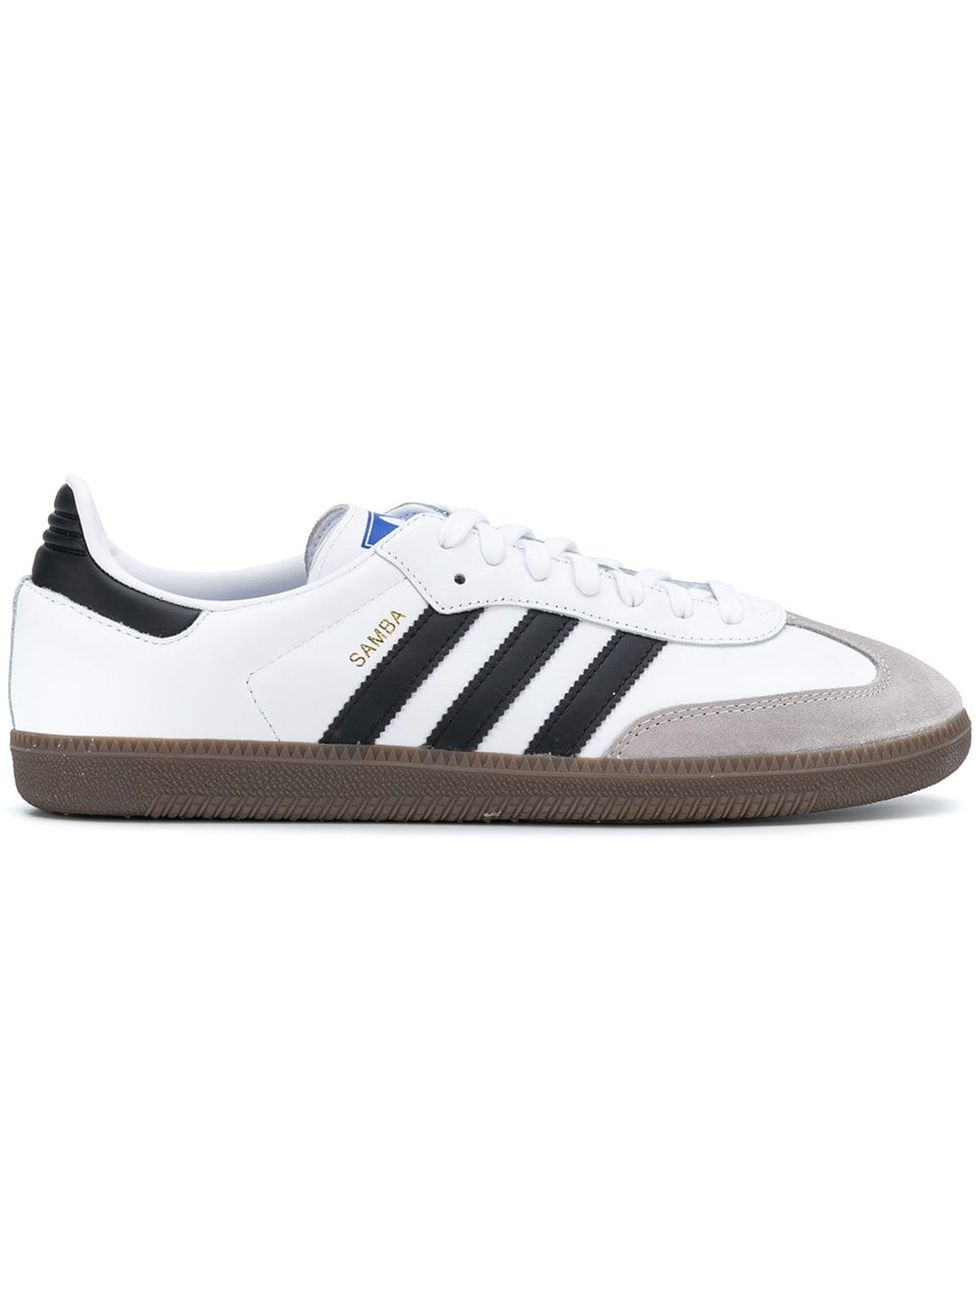 Adidas Superstar Classic White/Black Sneakers - Farfetch